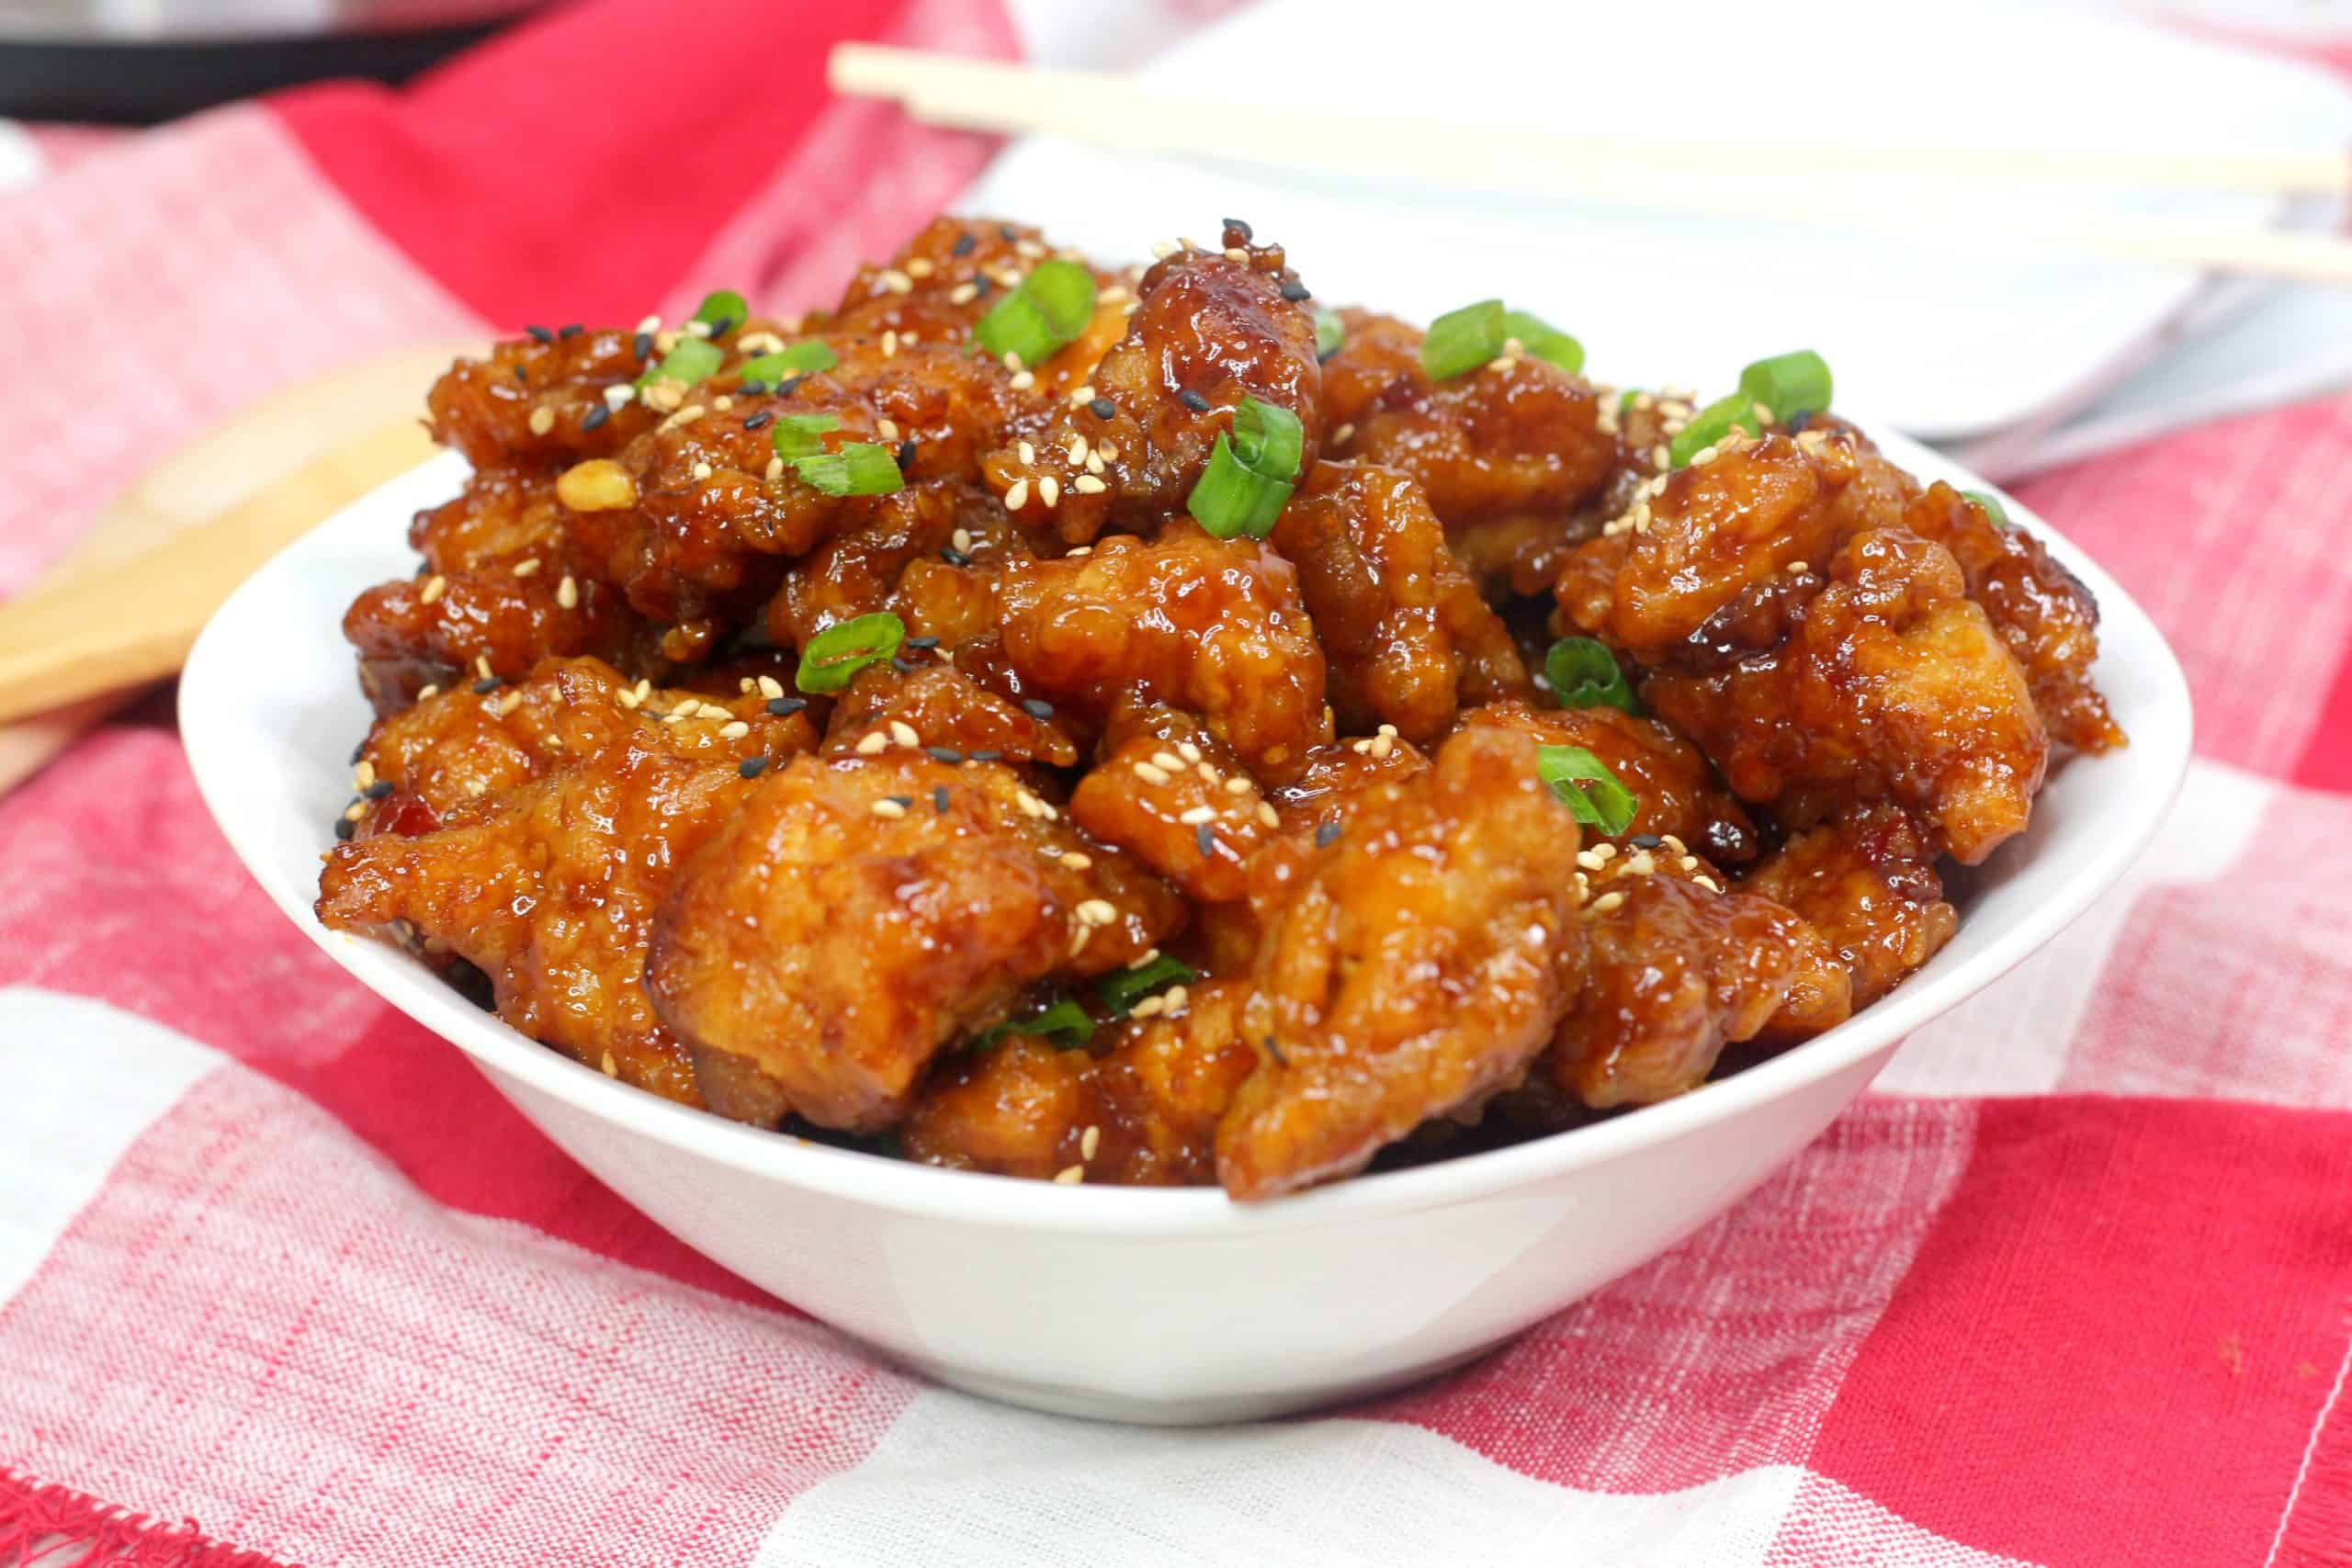 Bowl of general tso chicken on tablecloth